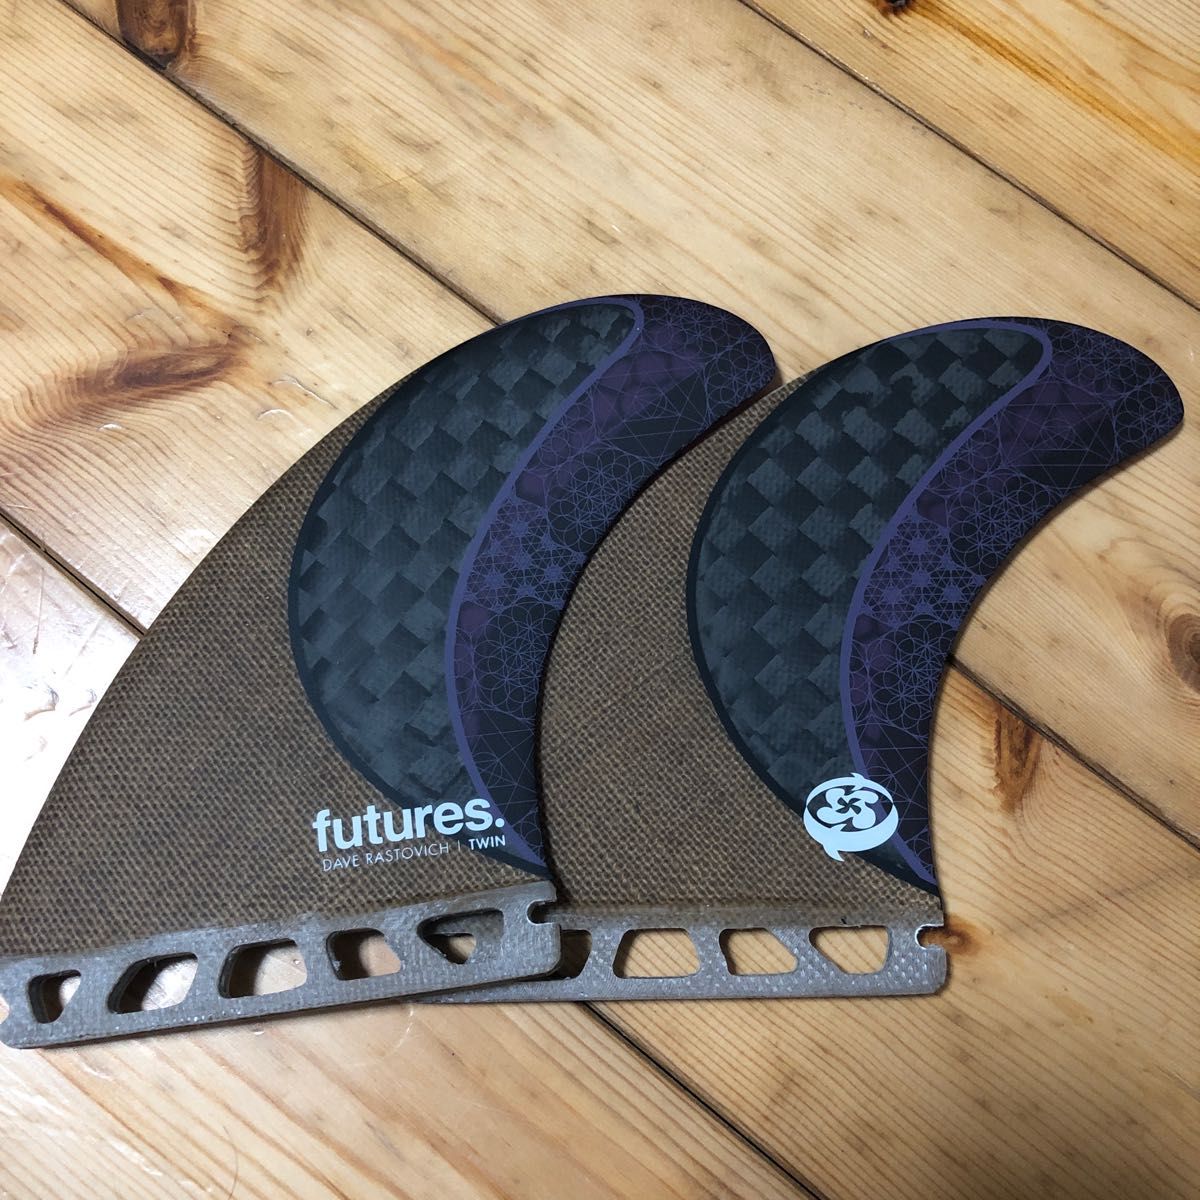 futures. TWIN FINS